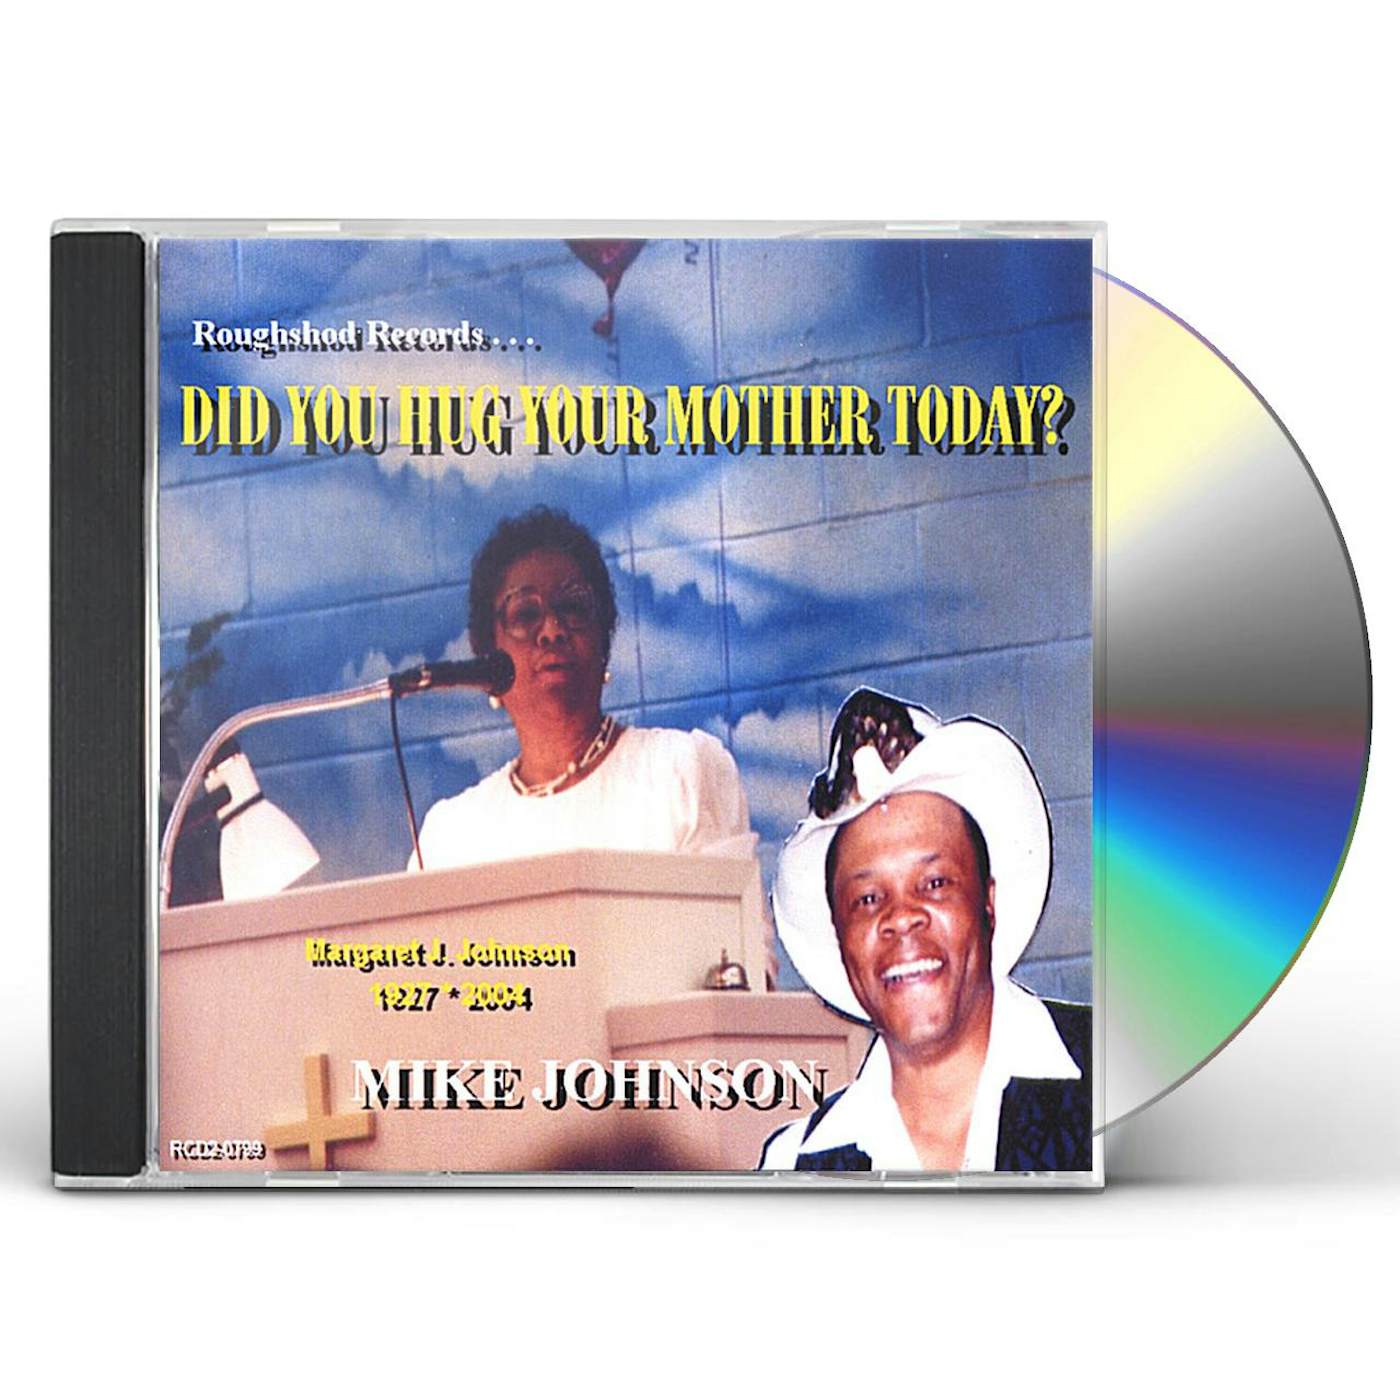 Mike Johnson DID YOU HUG YOUR MOTHER TODAY? CD